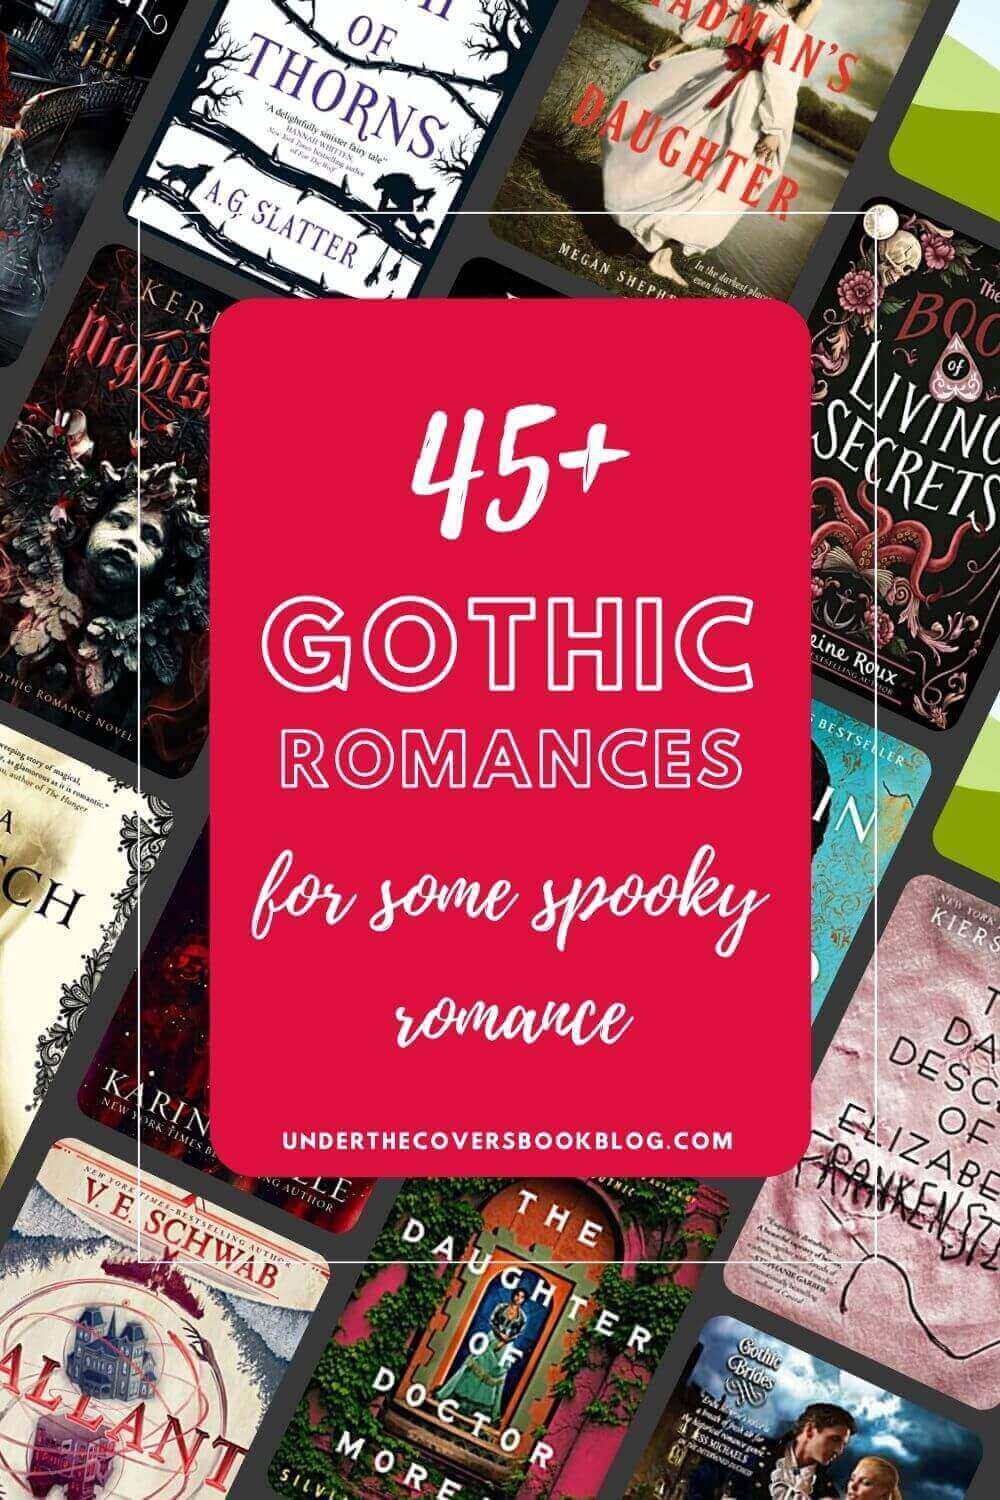 Gothic Romance Books: Everything You Need to Know